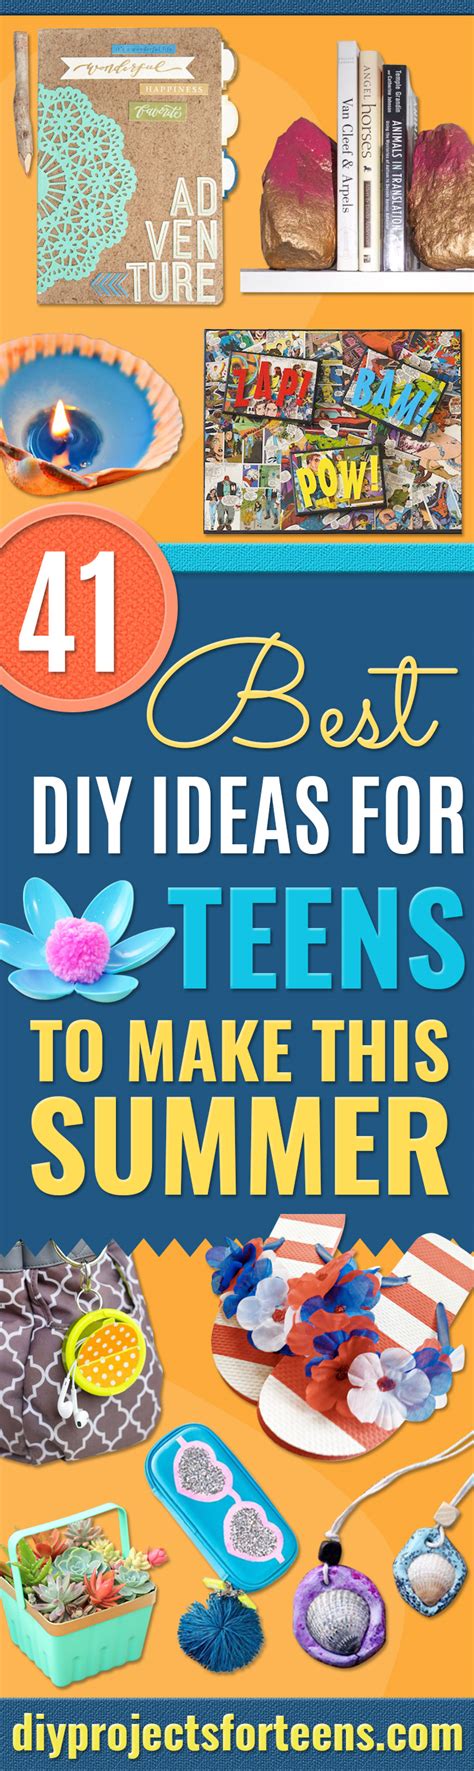 How to make bedroom cooler in summer. 41 Best DIY Ideas for Teens To Make This Summer - DIY ...